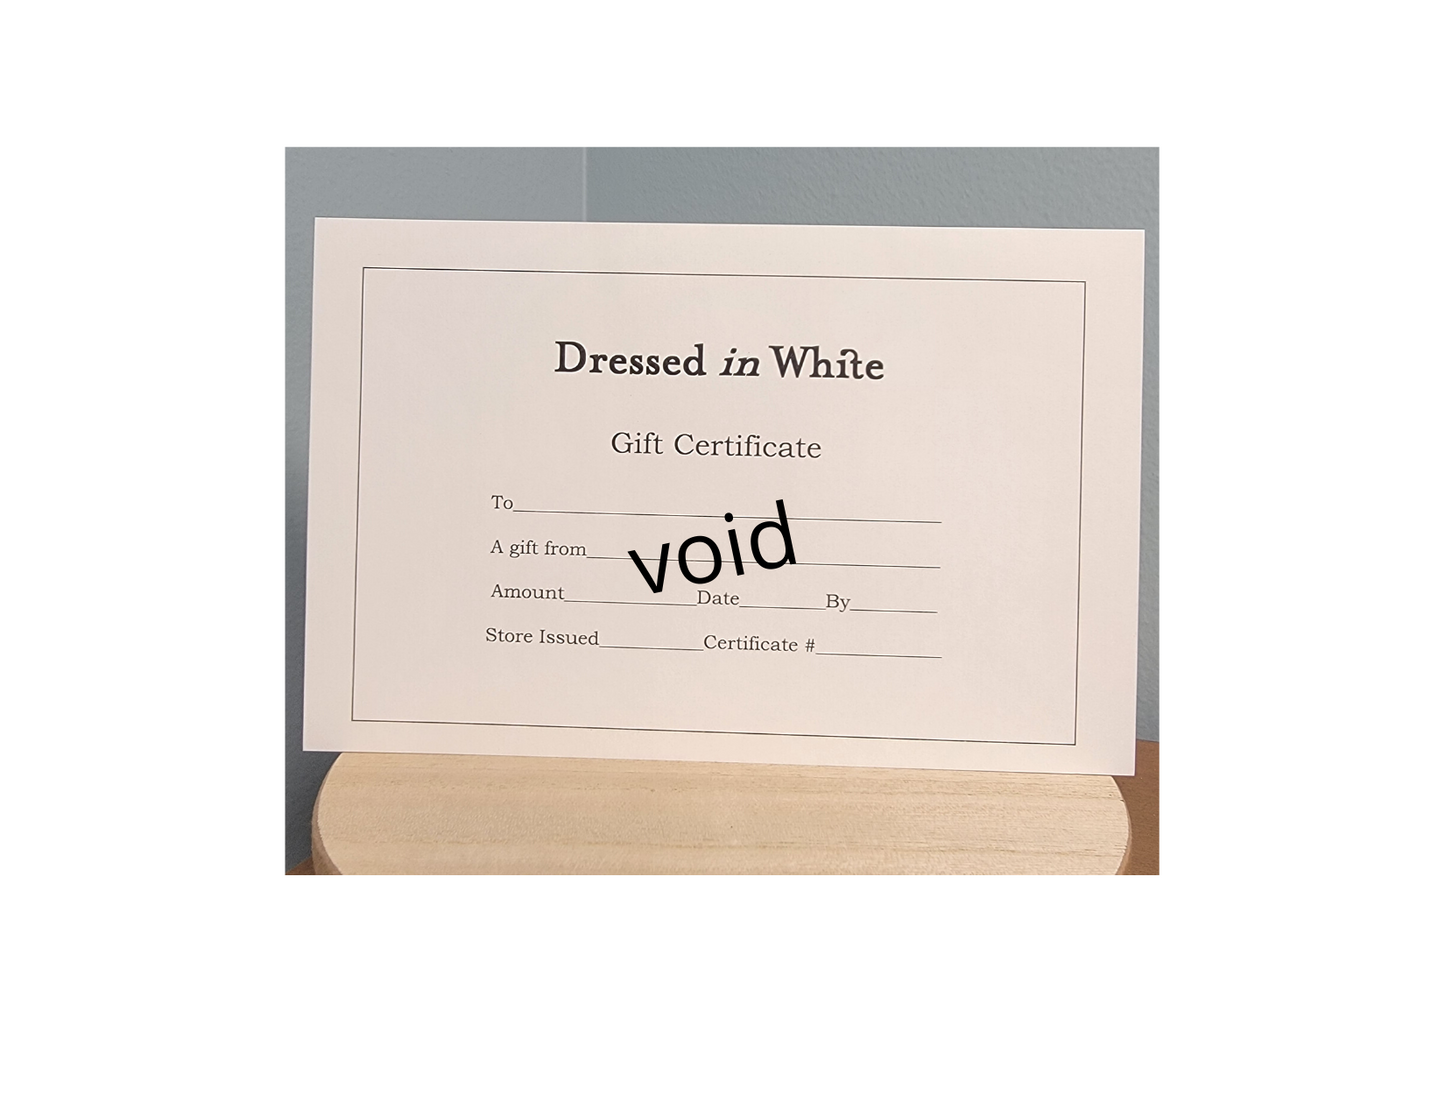 Dressed in White Gift Certificate